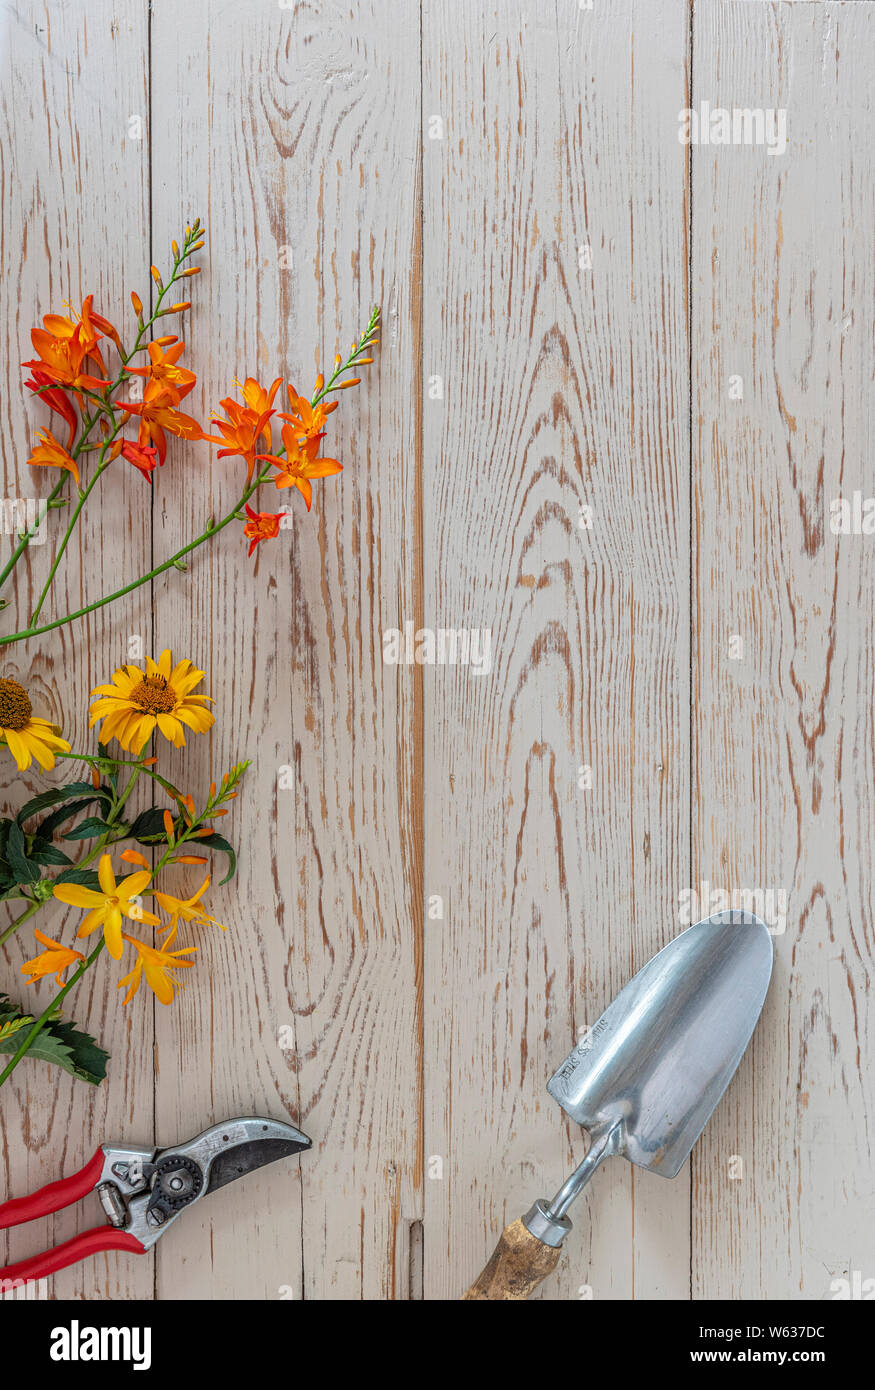 Summer flowers laid on a wooden table, with copy space and garden tools. Stock Photo